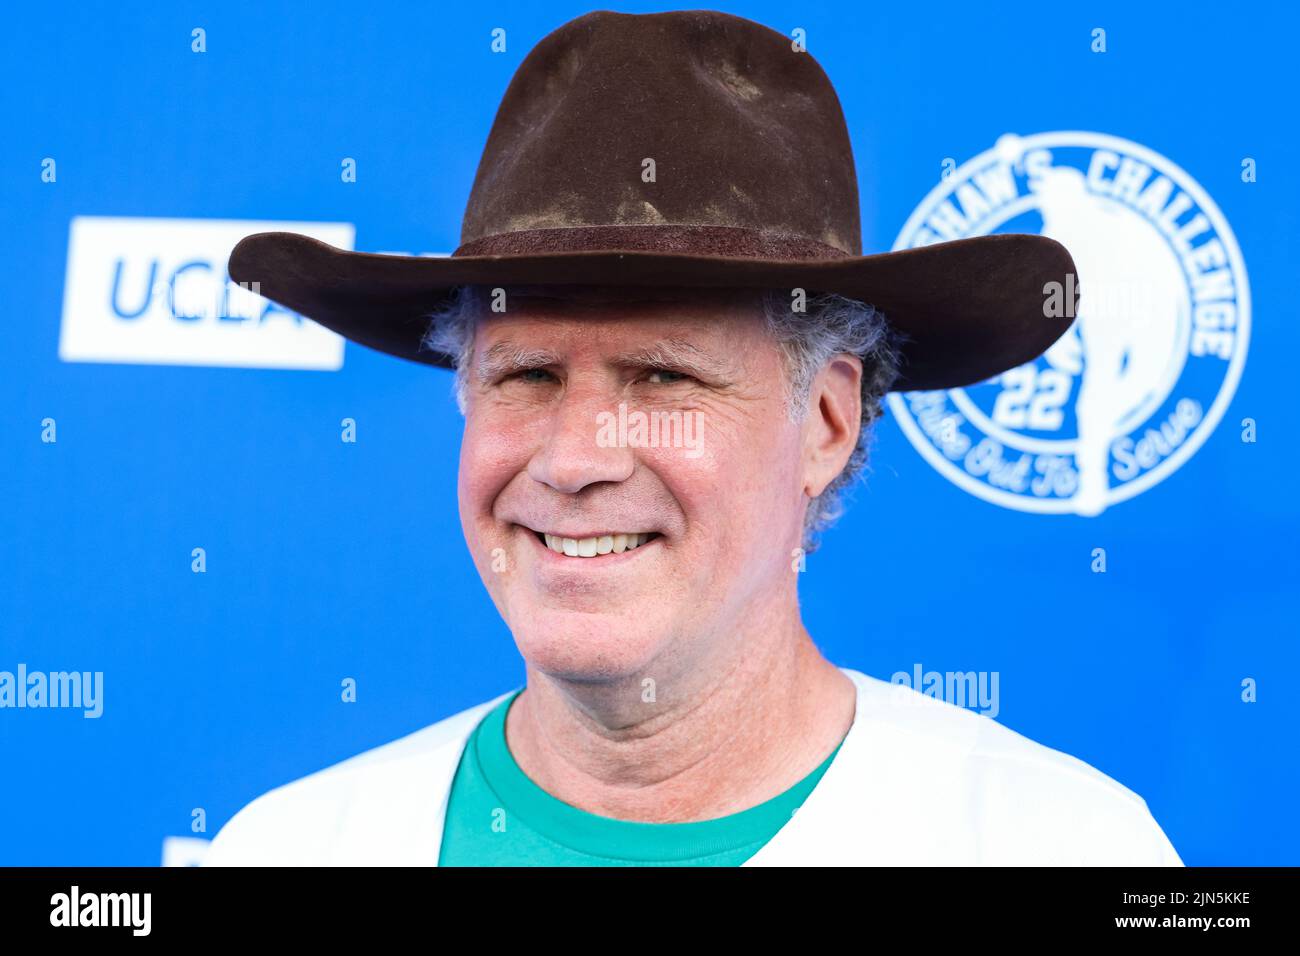 Los Angeles, United States. 08th Aug, 2022. ELYSIAN PARK, LOS ANGELES, CALIFORNIA, USA - AUGUST 08: American actor Will Ferrell arrives at Kershaw's Challenge Ping Pong 4 Purpose 2022 held at Dodger Stadium on August 8, 2022 in Elysian Park, Los Angeles, California, United States. (Photo by Xavier Collin/Image Press Agency) Credit: Image Press Agency/Alamy Live News Stock Photo